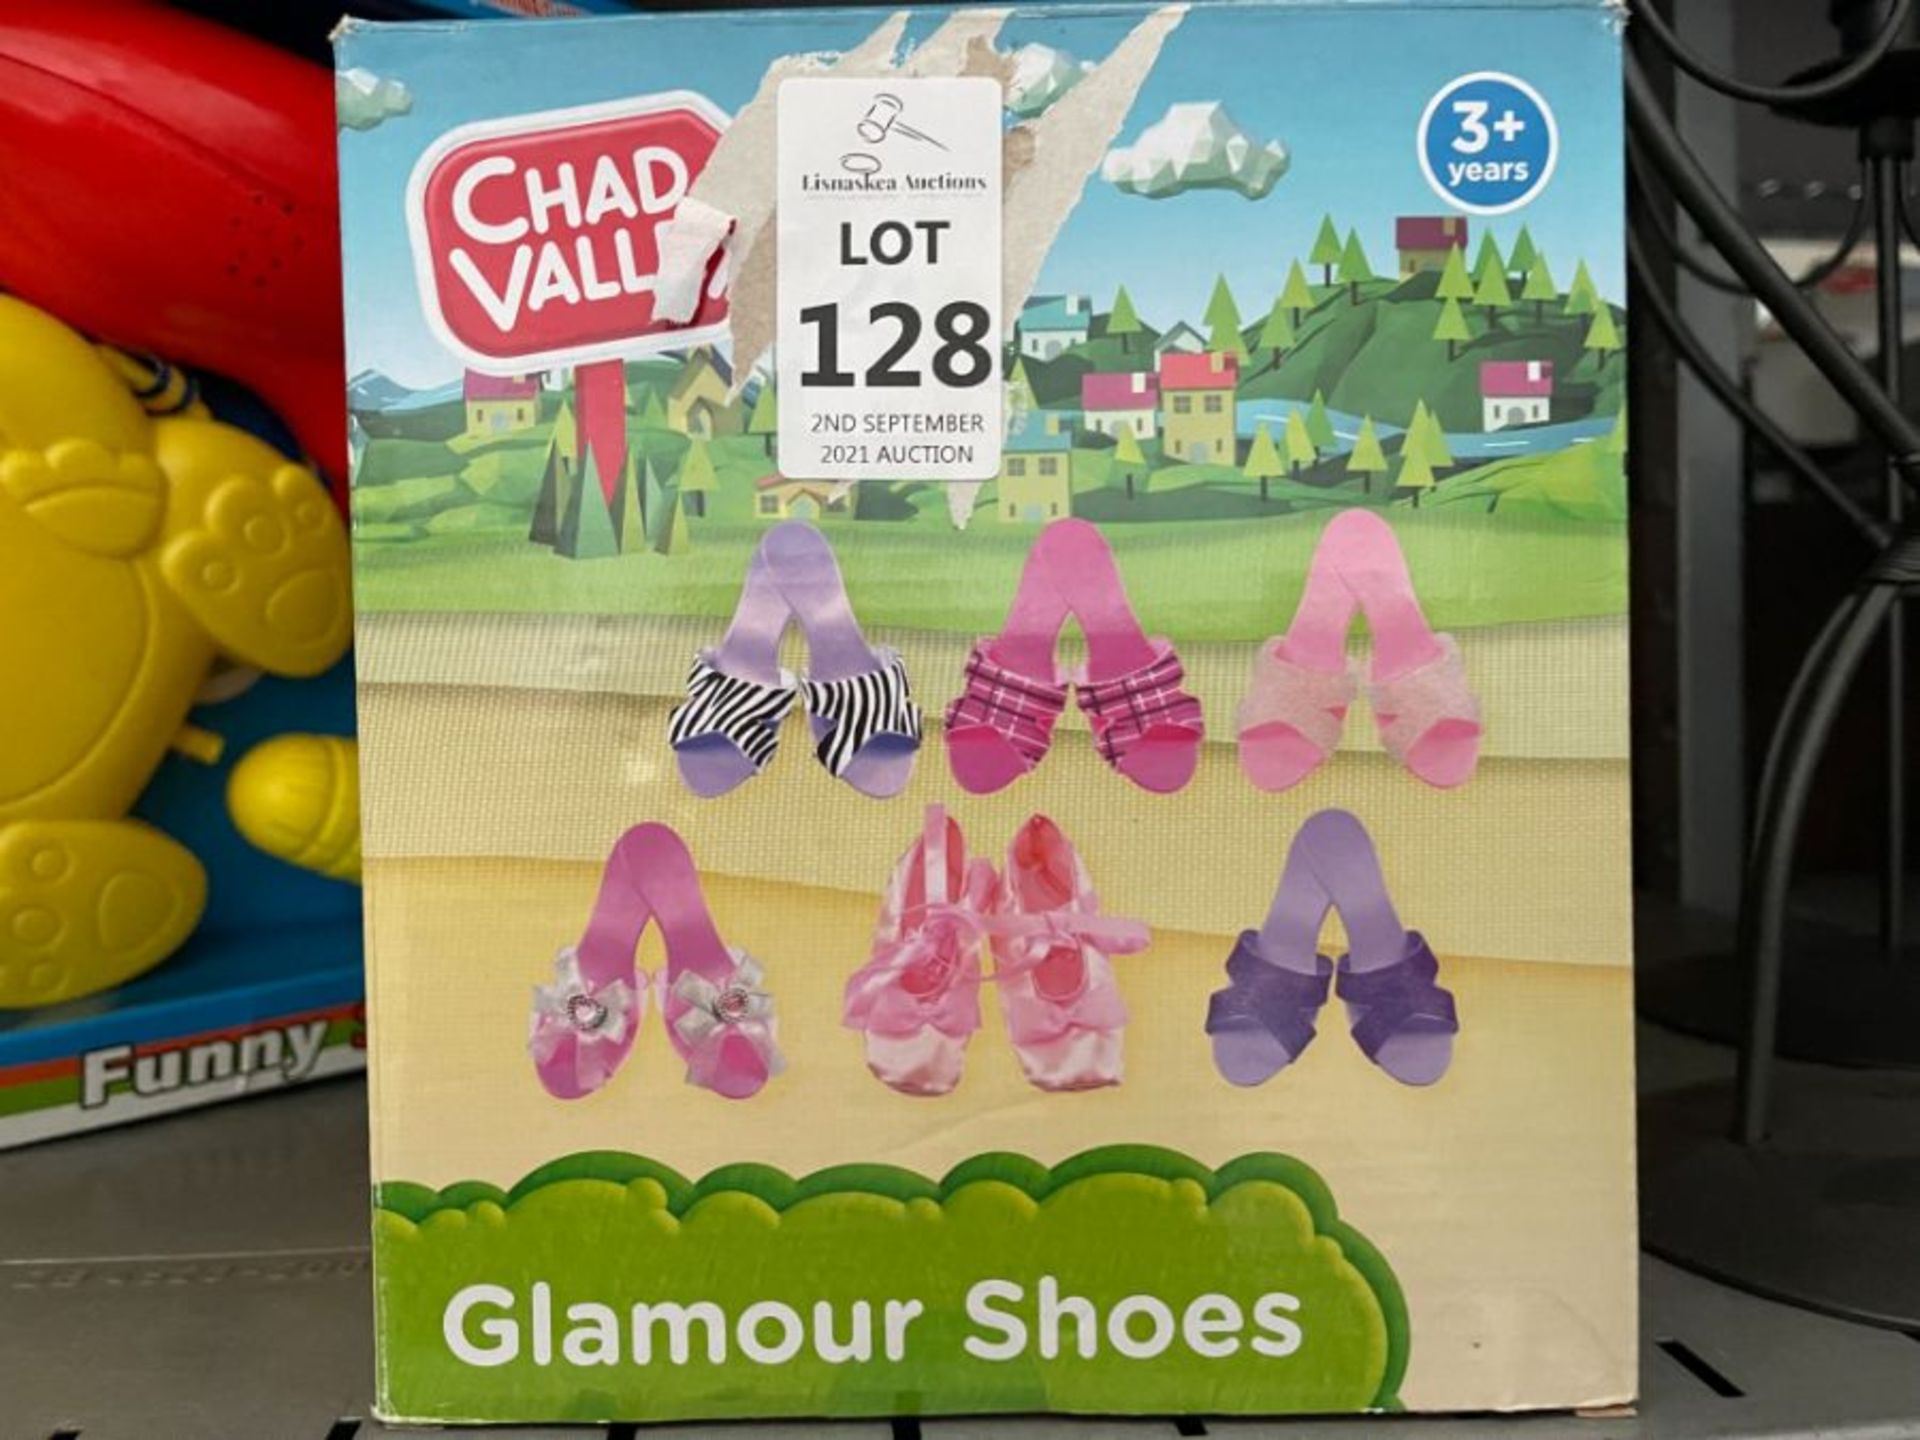 CHAD VALLEY GLAMOUR SHOES